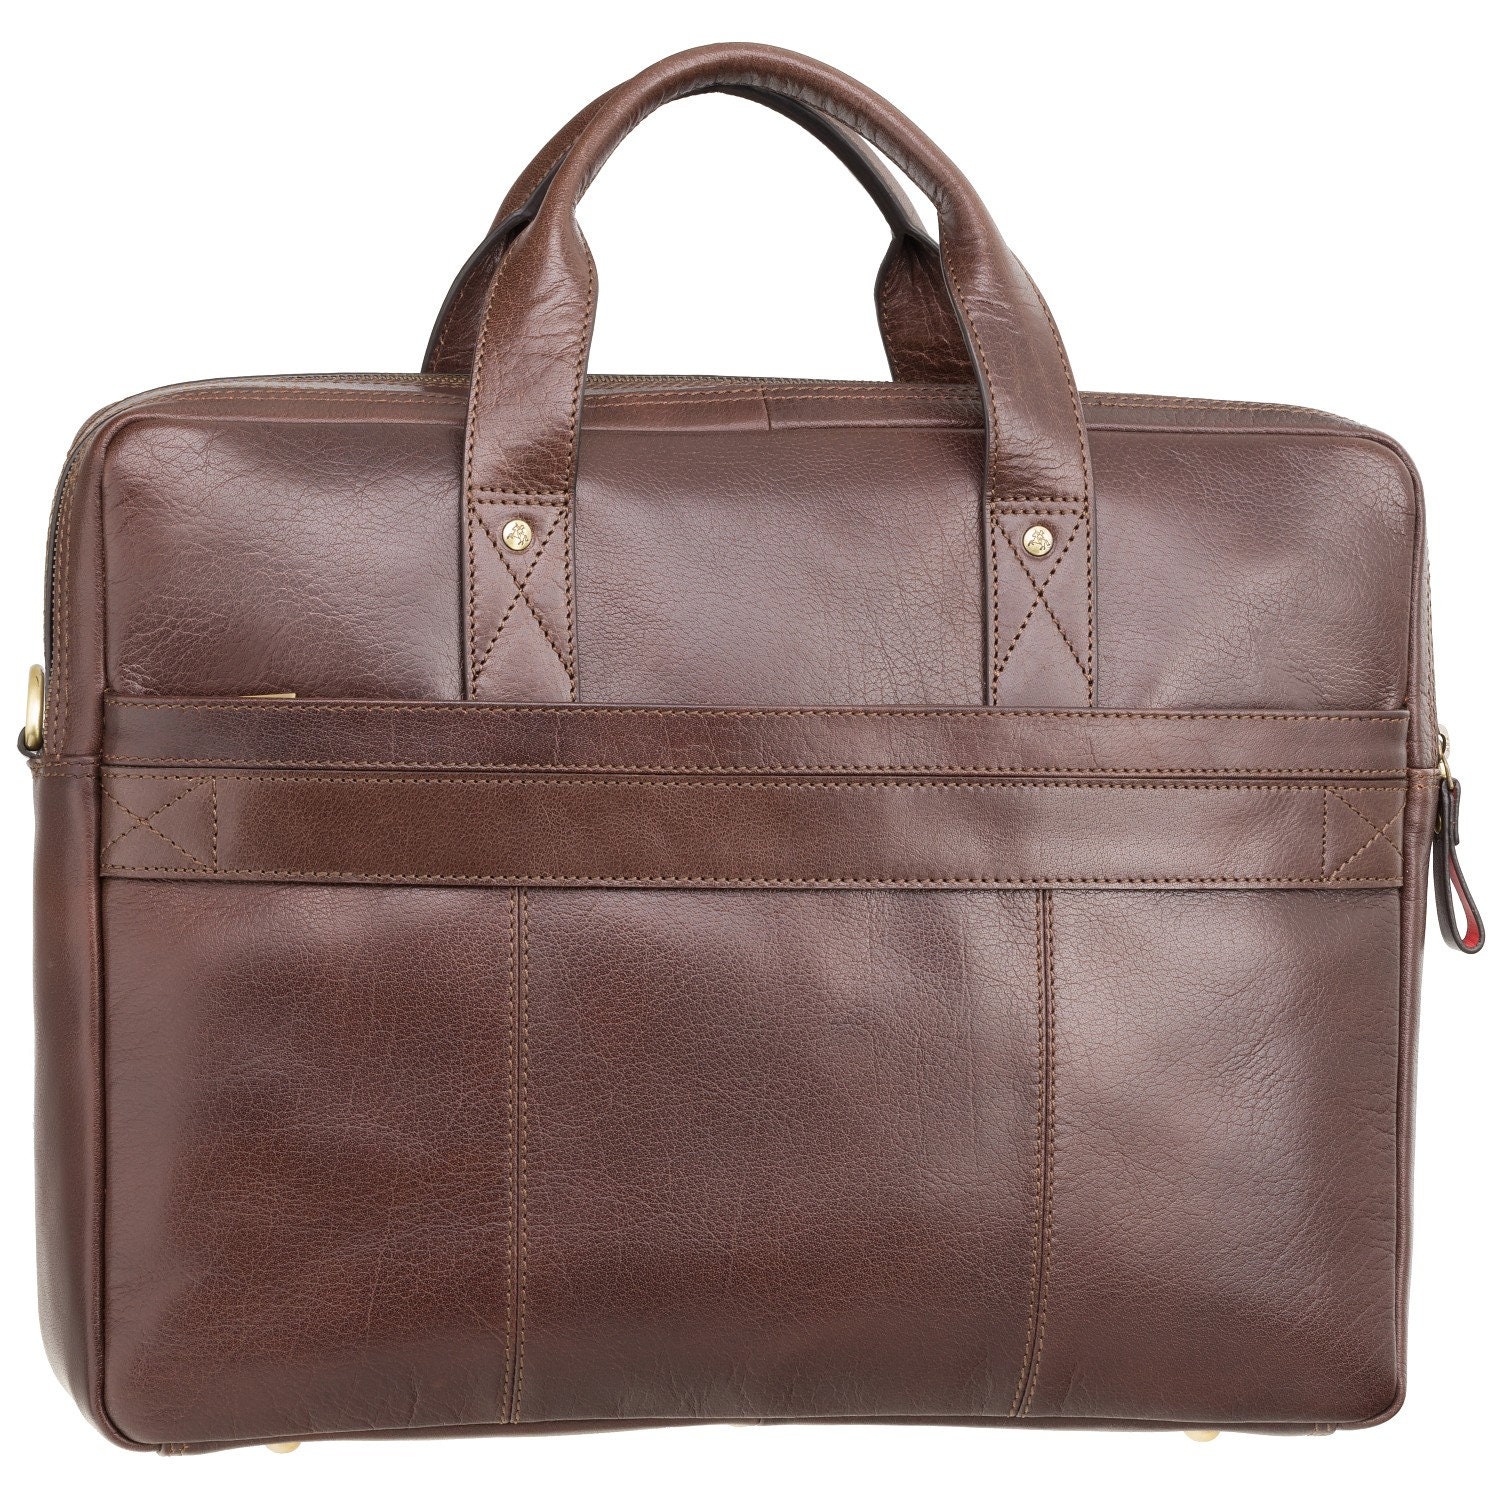 Large Man's Leather Bag Anderson Brown Natural Full - Etsy